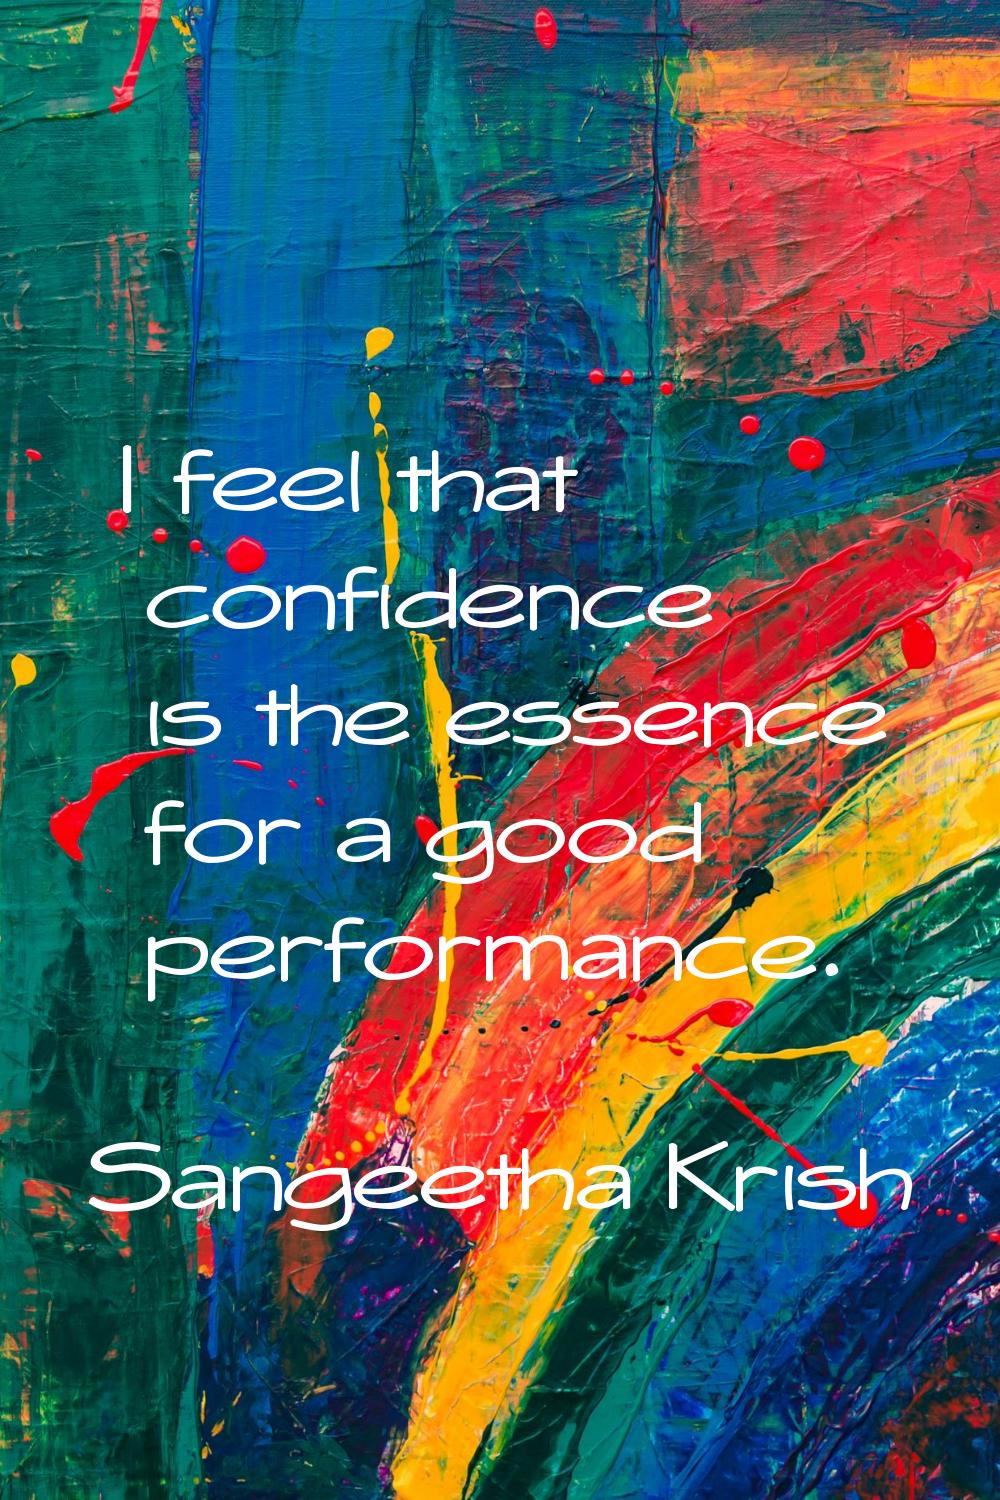 I feel that confidence is the essence for a good performance.